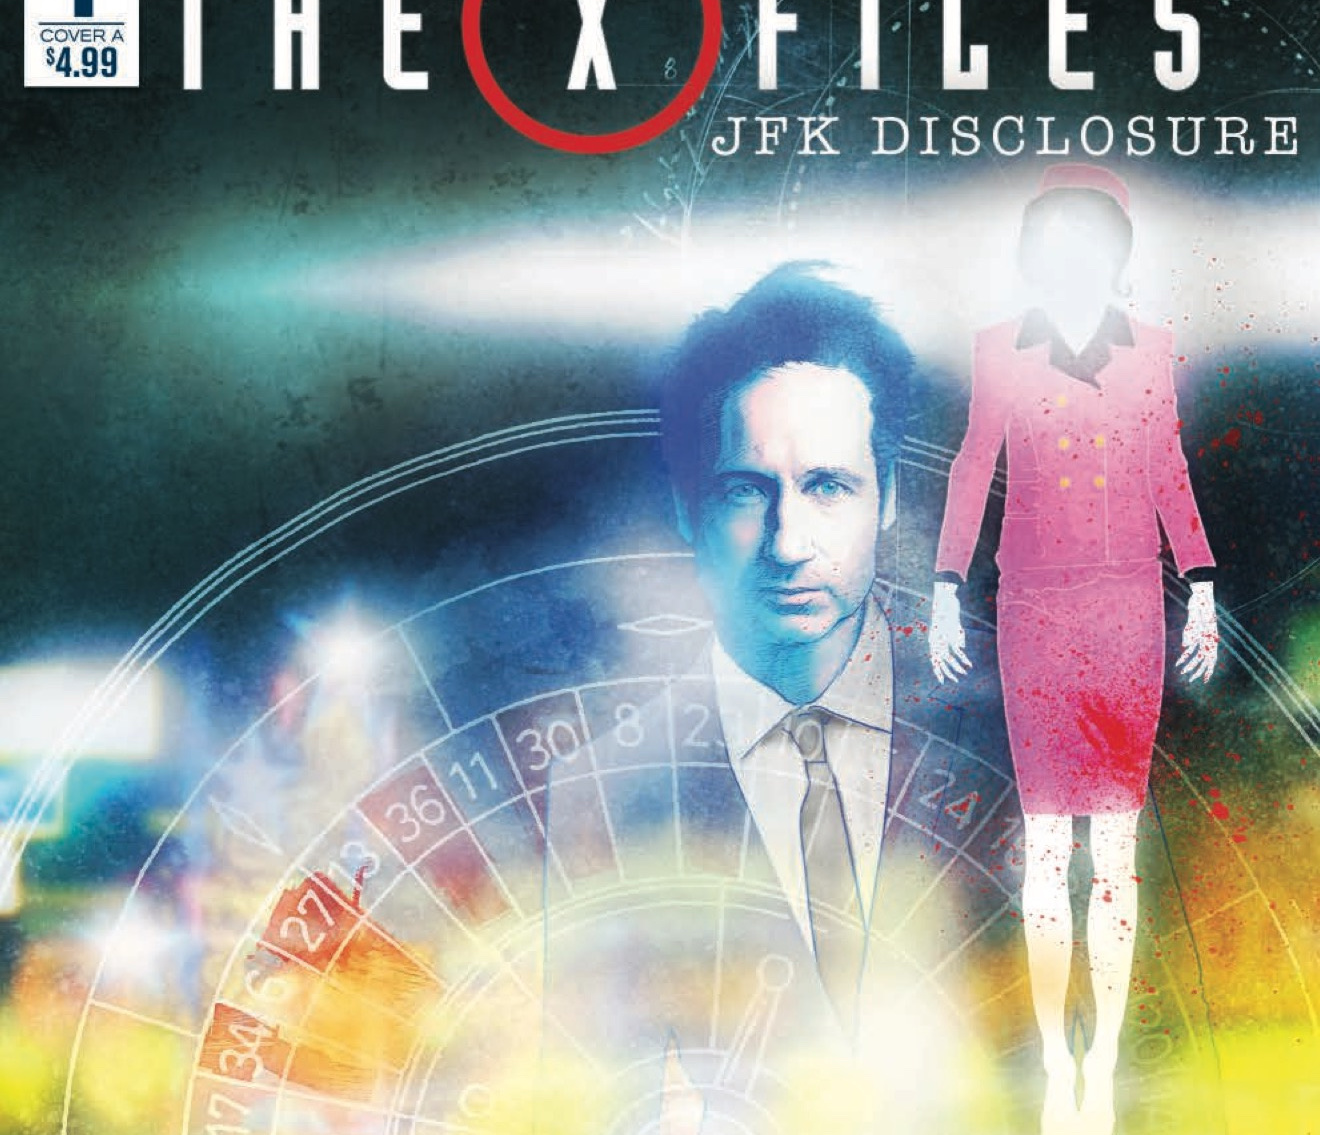 [EXCLUSIVE] IDW Preview: The X-Files: JFK Disclosure #1